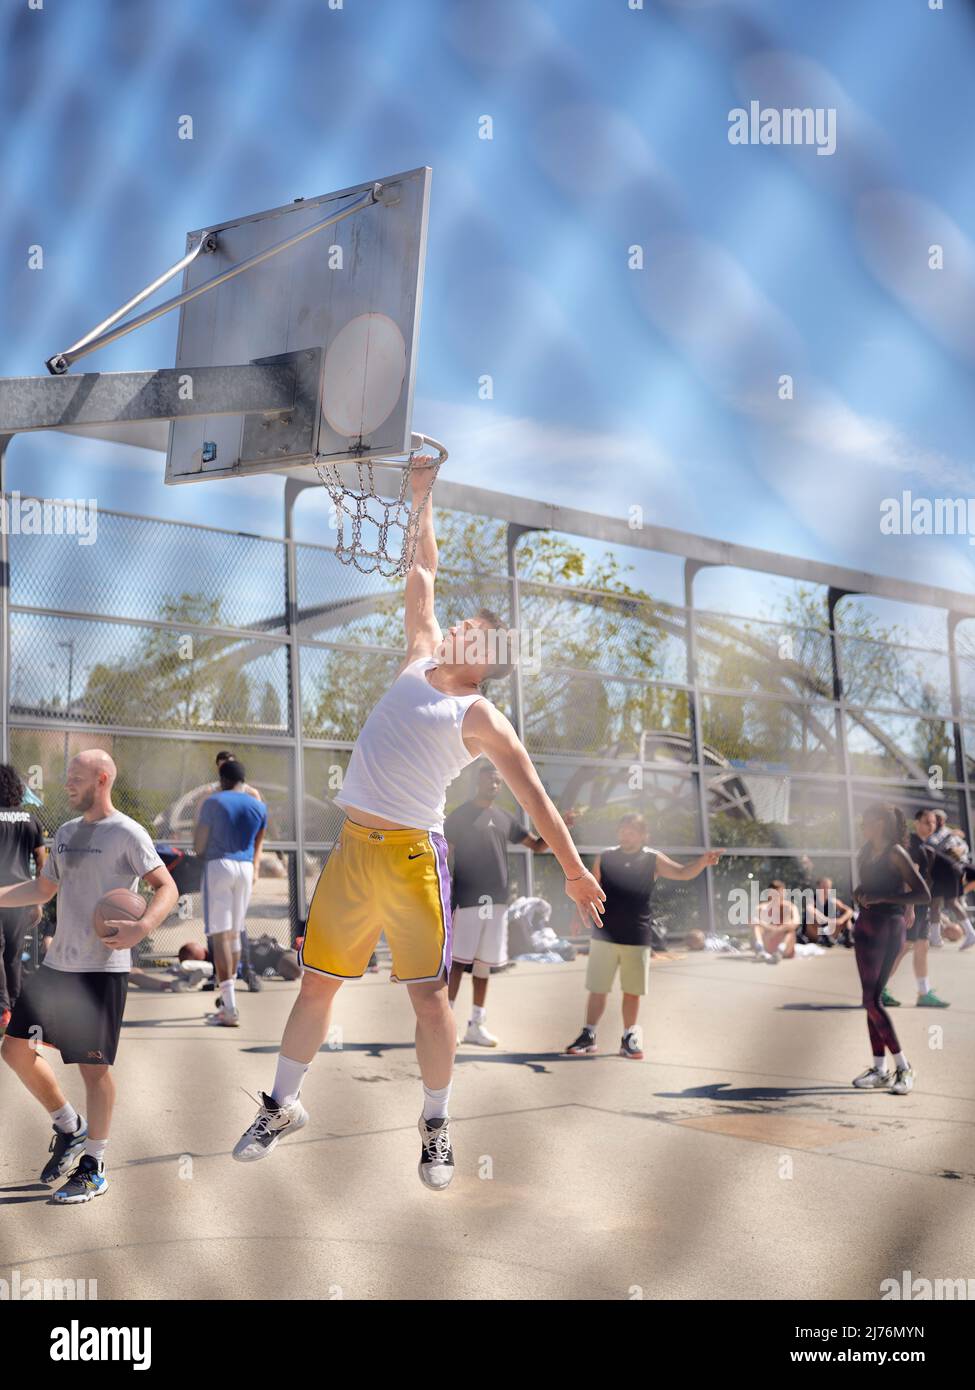 A young man has jumped to the basketball hoop and is holding on to it, in the harbor park in Frankfurt Stock Photo